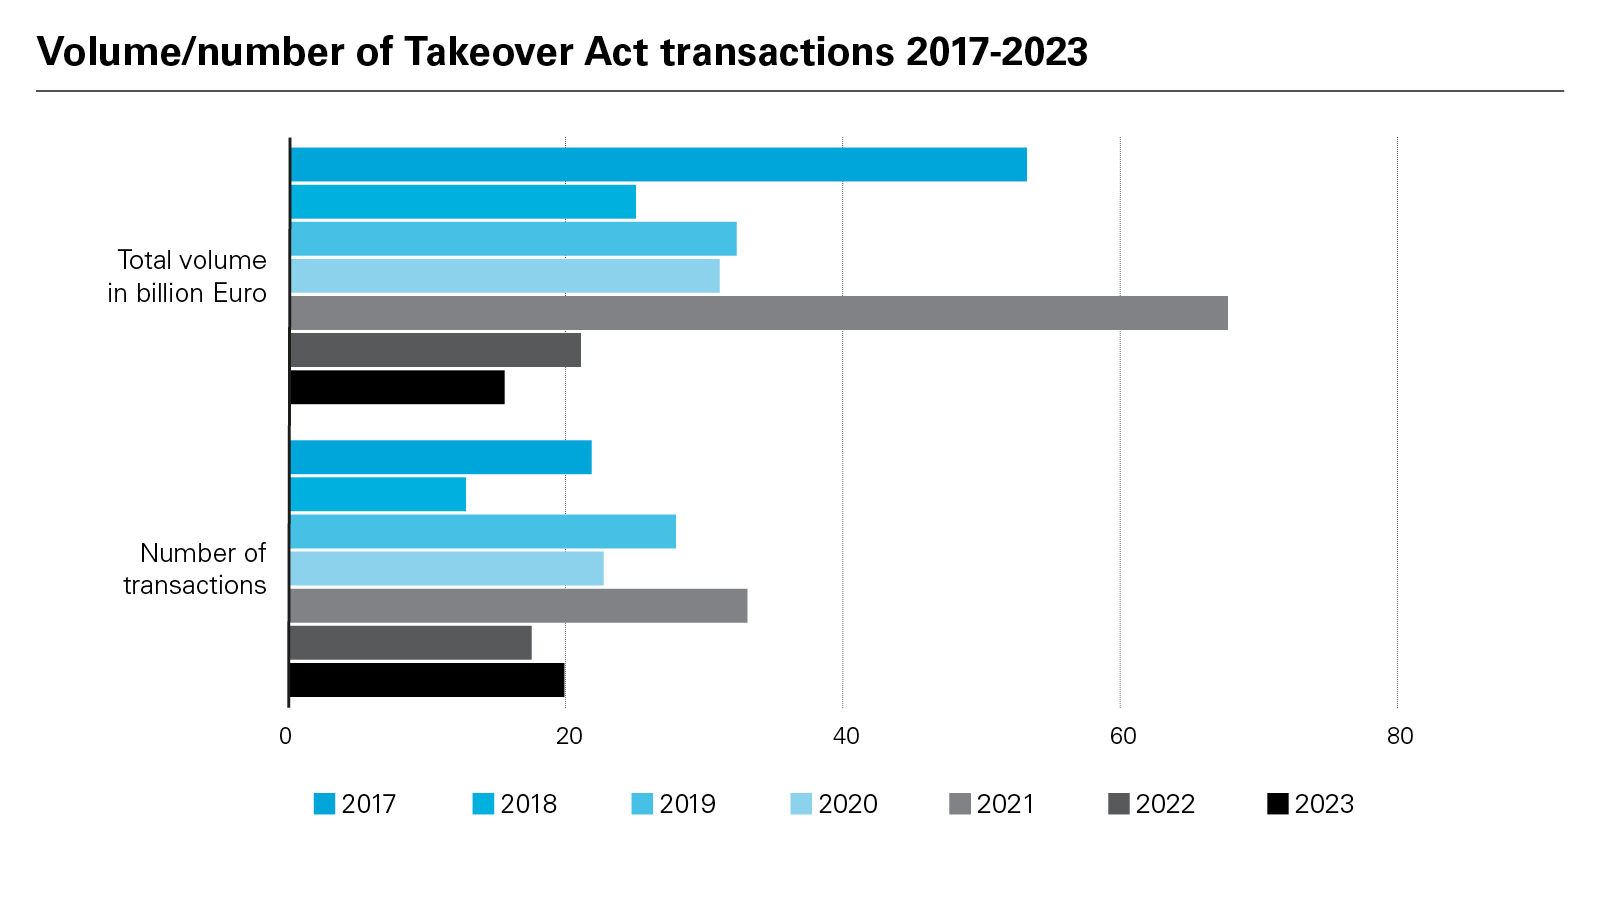 Volume/number of Takeover Act transactions 2017-2023